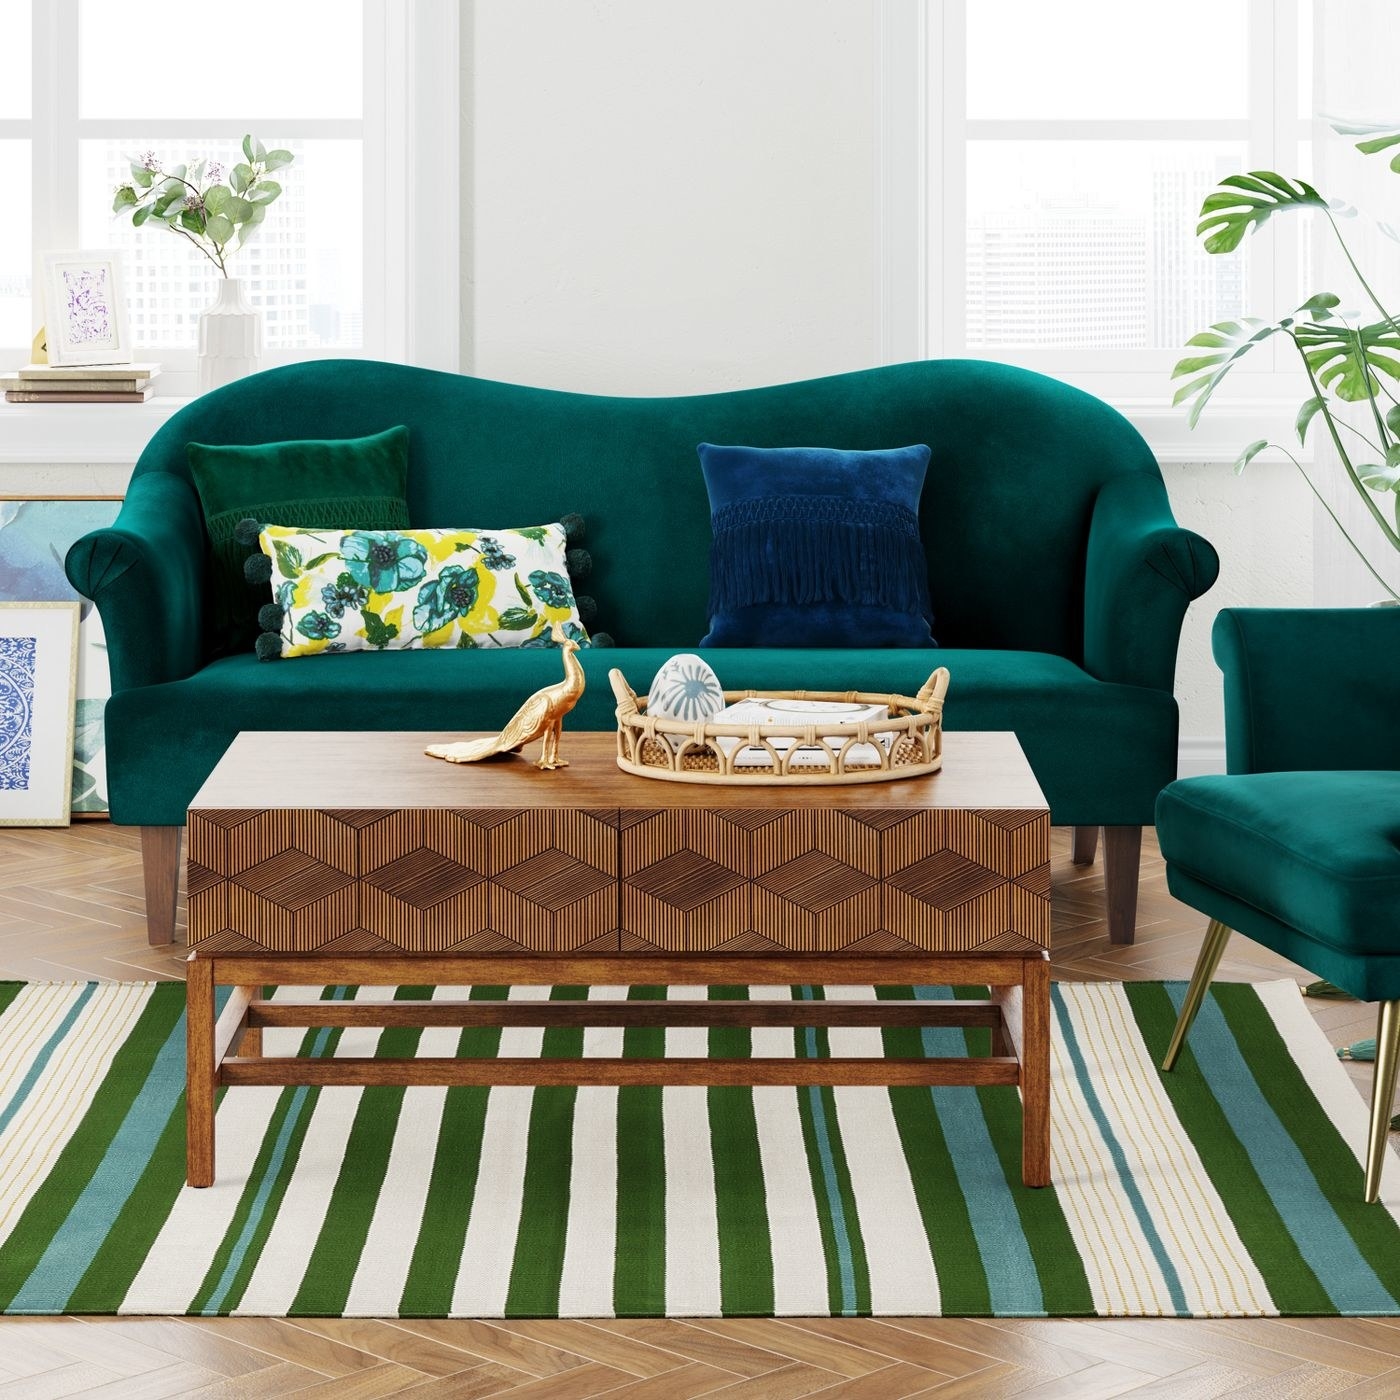 green, cream, and blue striped woven rug in a living room with matching furniture